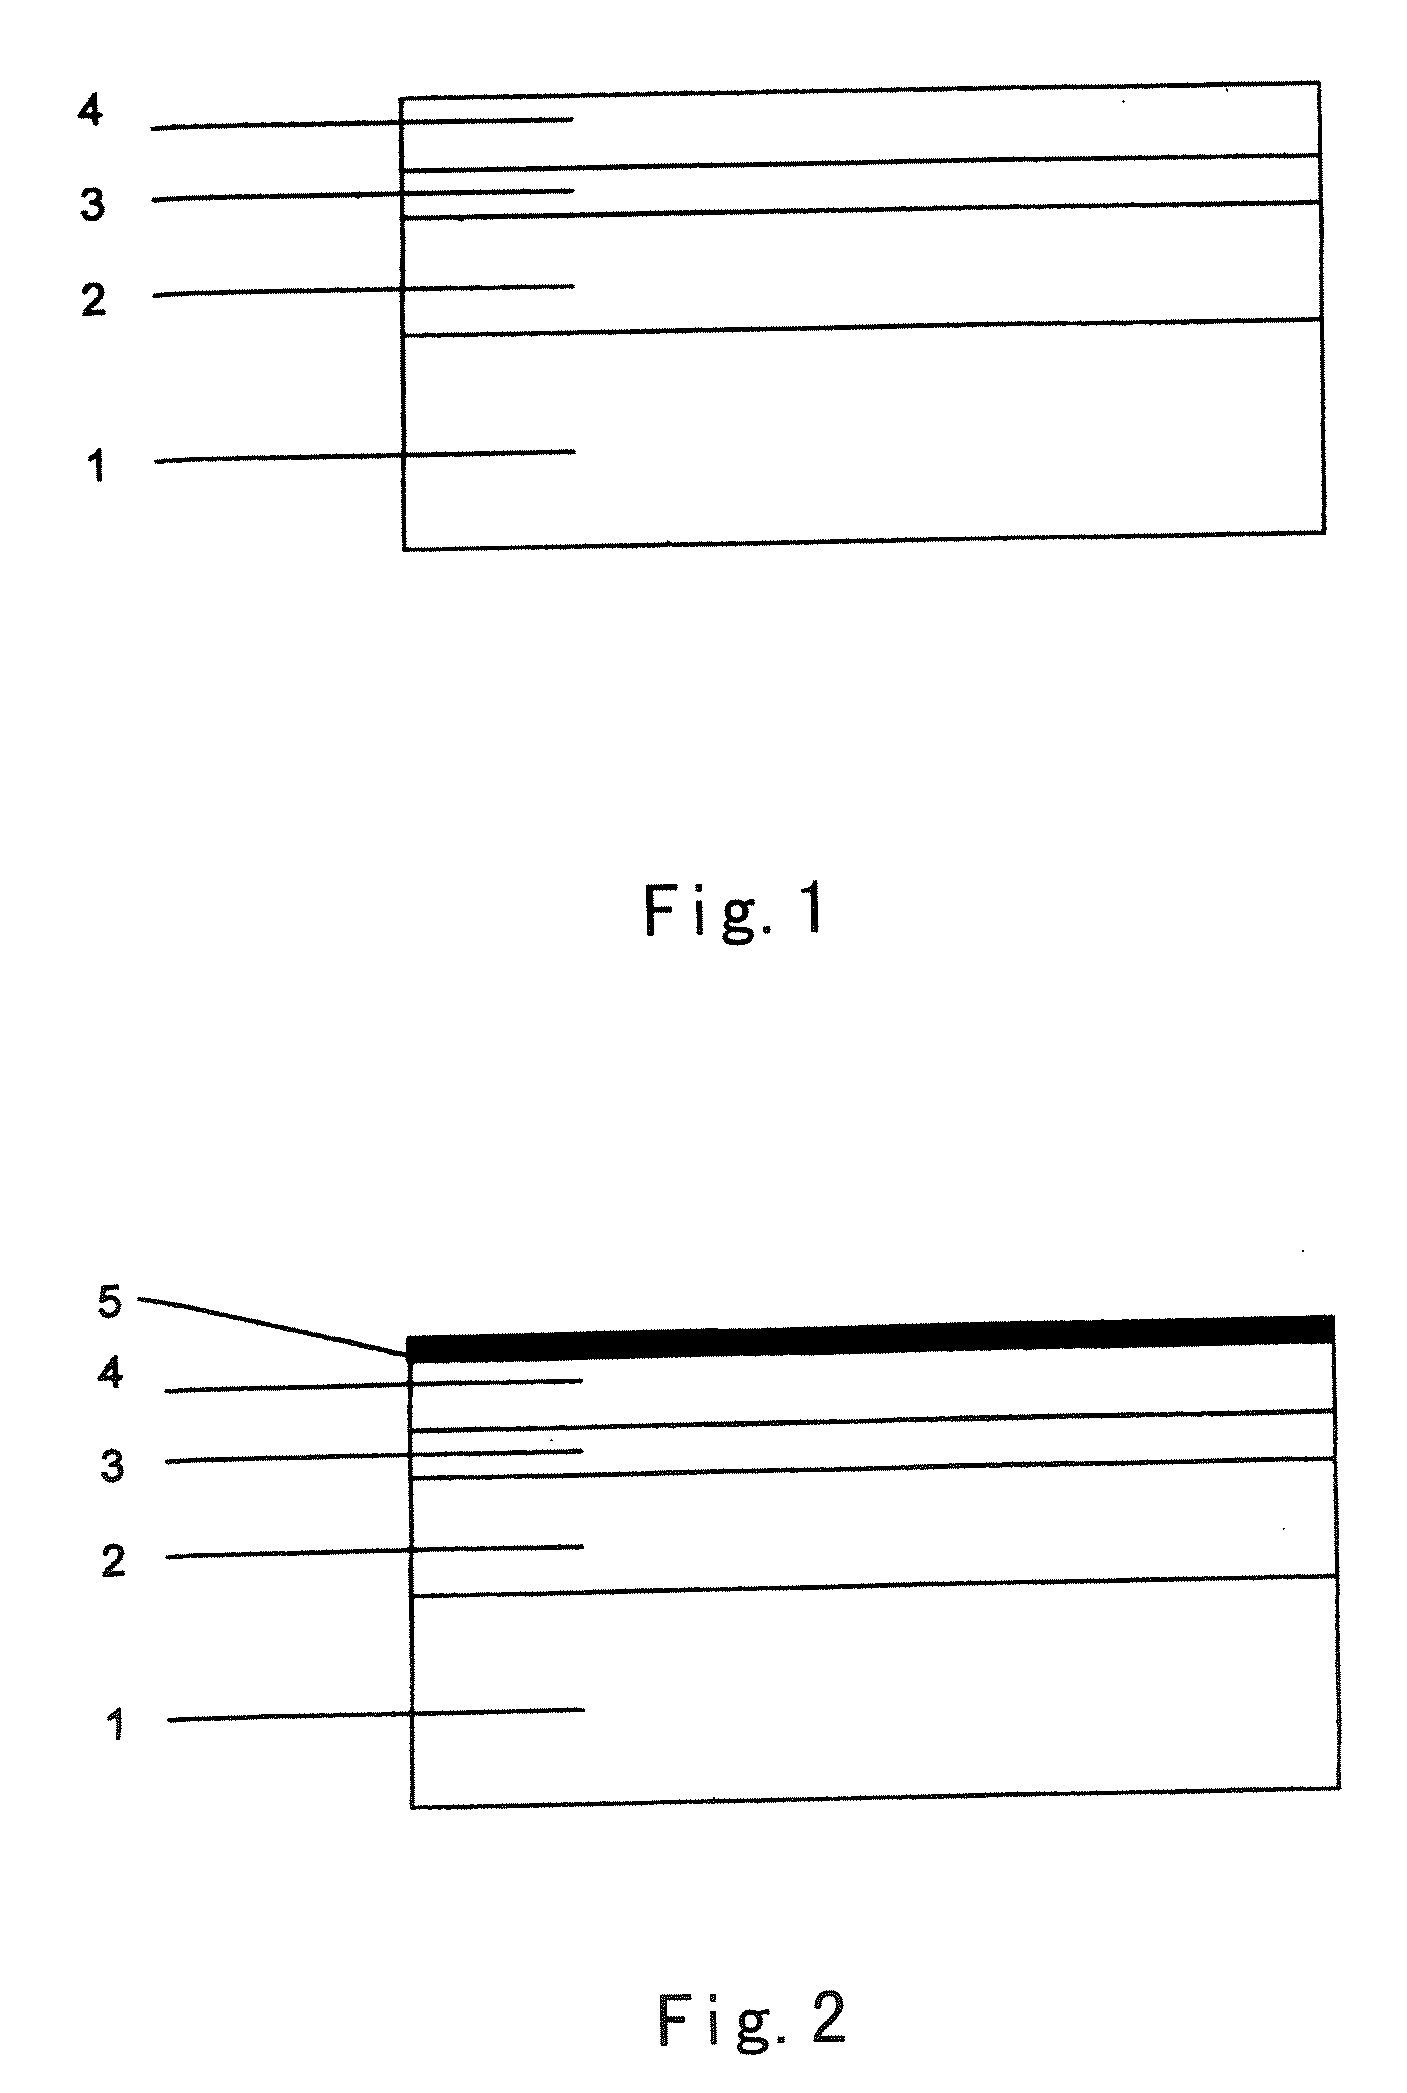 Fabrication Method of GaN Power LEDs with Electrodes Formed by Composite Optical Coatings